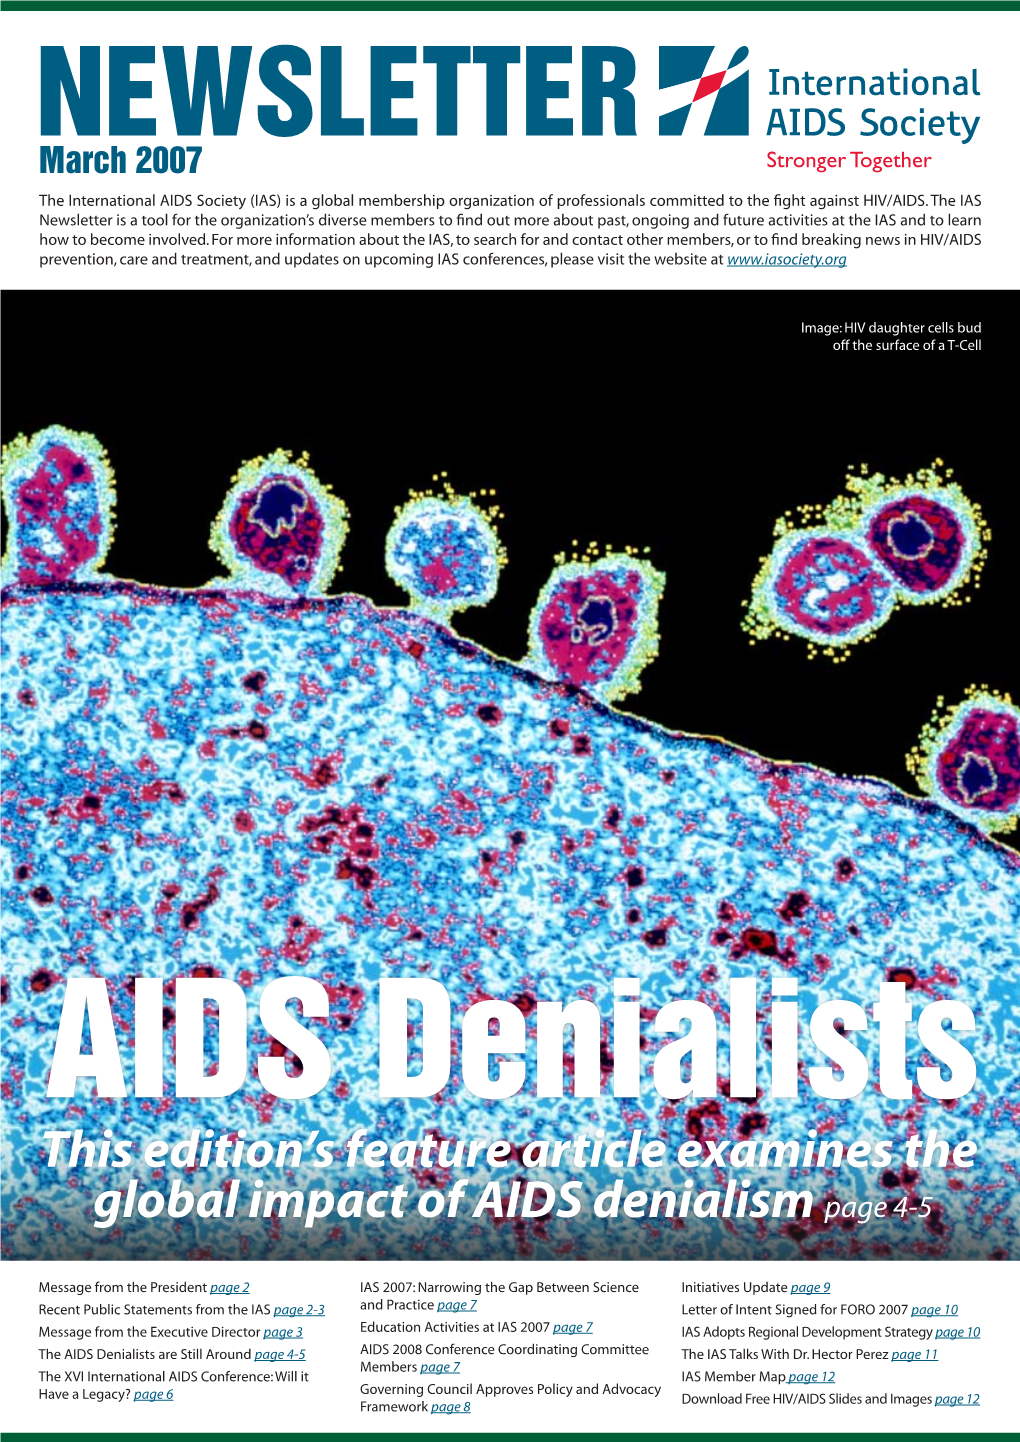 This Edition's Feature Article Examines the Global Impact of AIDS Denialism